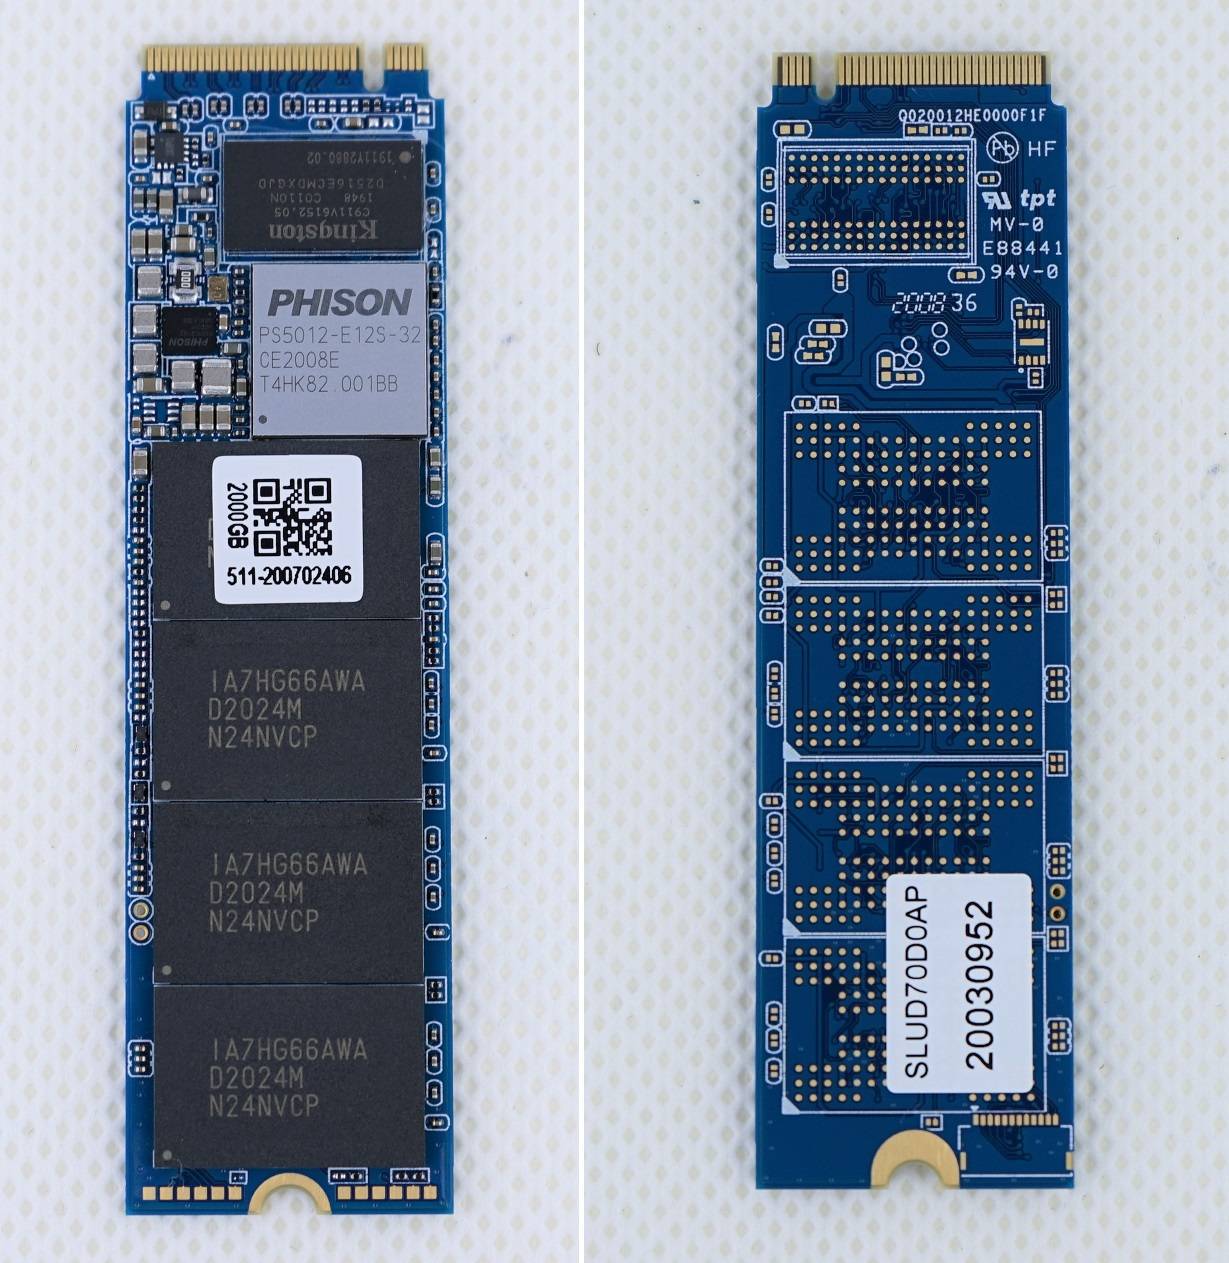 Silicon Power UD70 PCIe NVMe SSD